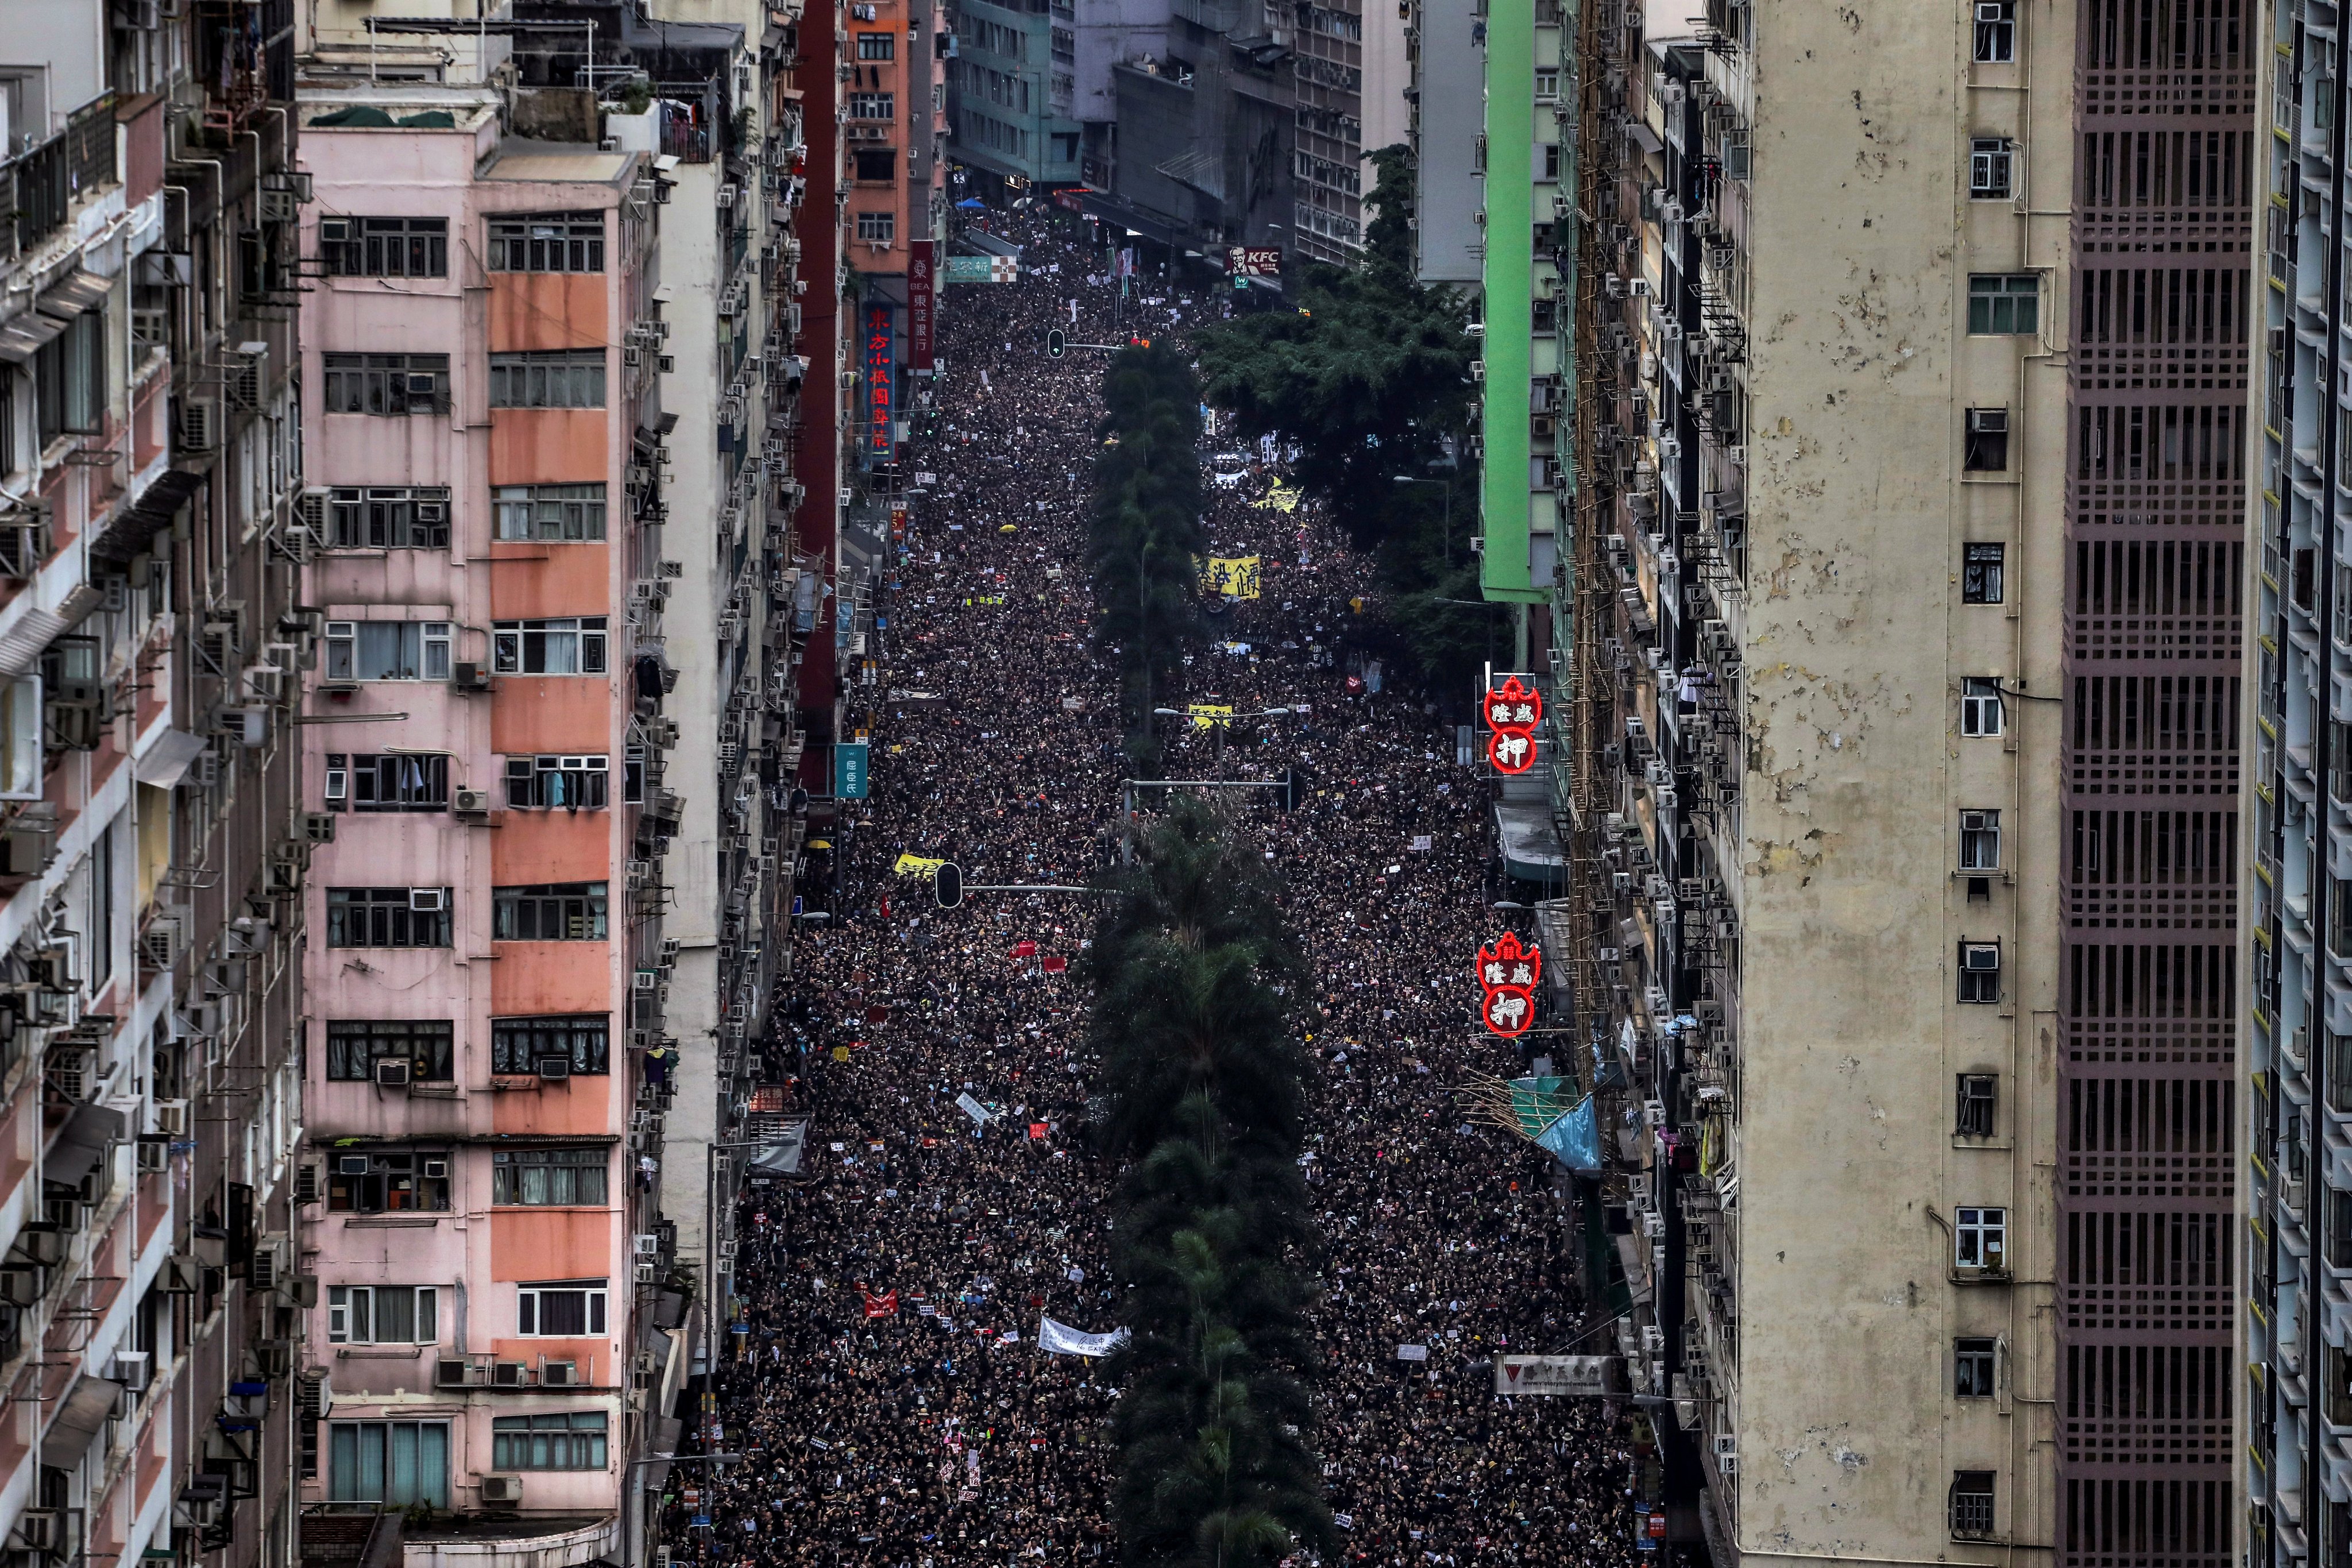 Thousands of protesters march through the streets of Hong Kong in a peaceful demonstration on June 16, 2019. Photo: Reuters